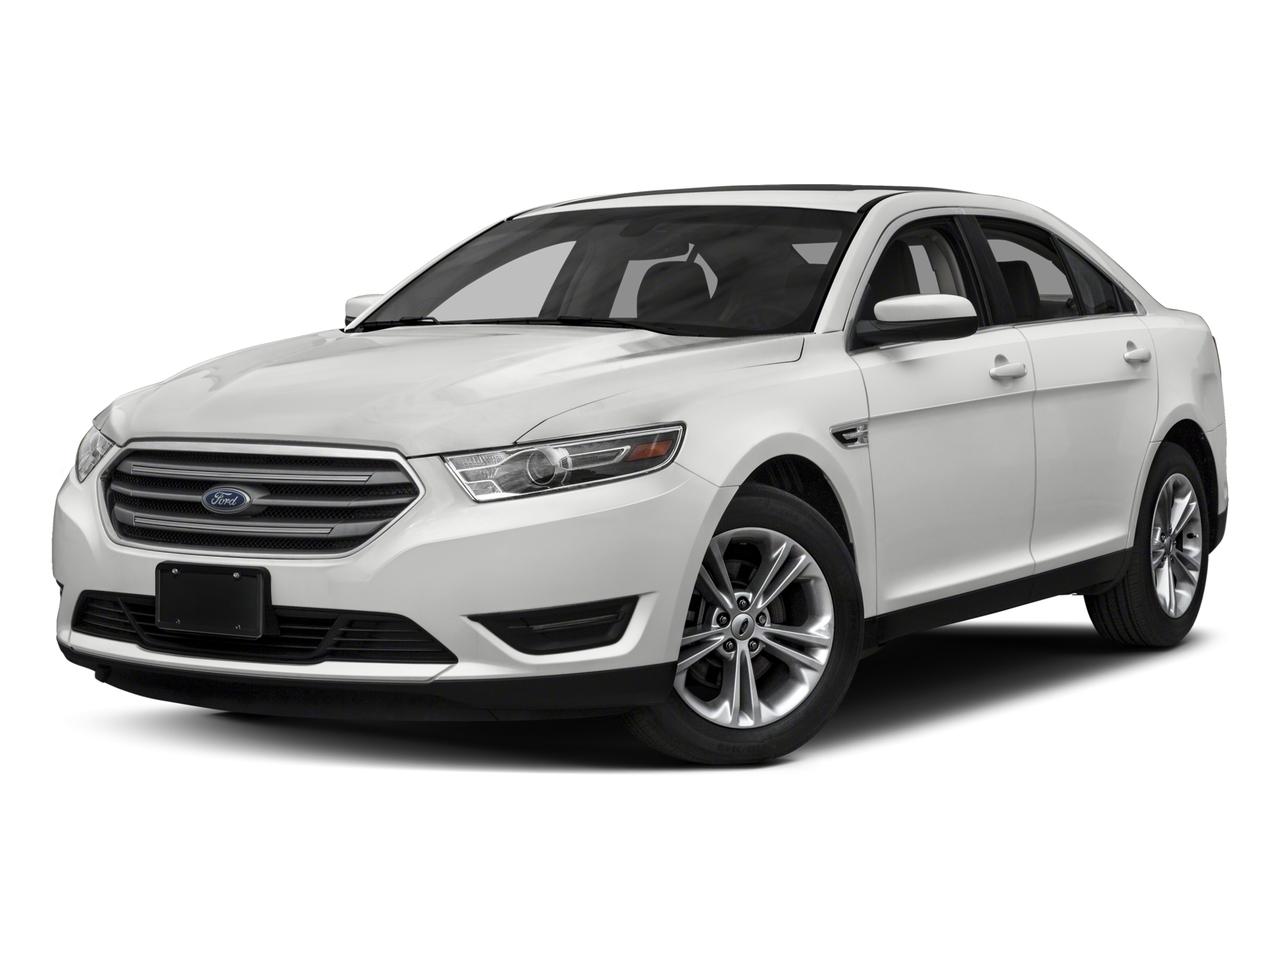 2018 Ford Taurus for sale in Brookfield 1FAHP2E87JG142353 Smith Motor